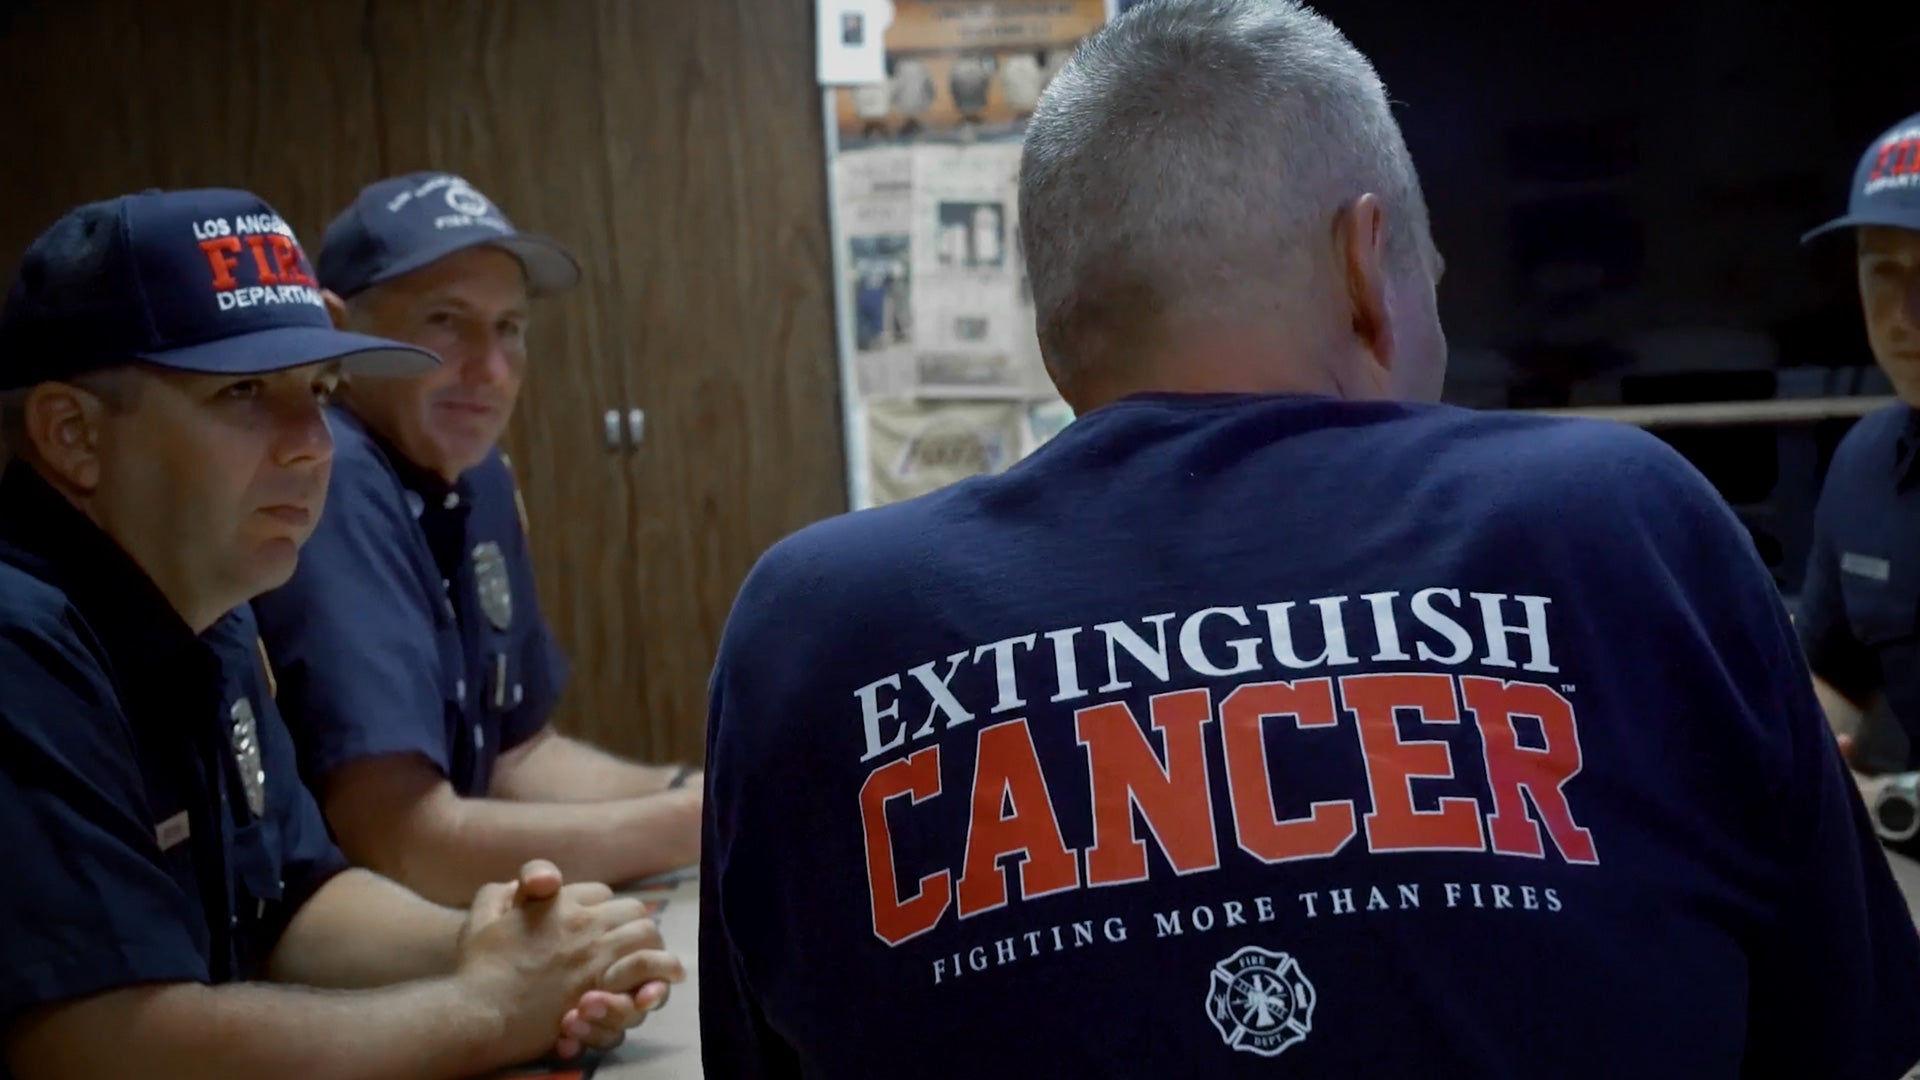 Load video: About Extinguish Cancer